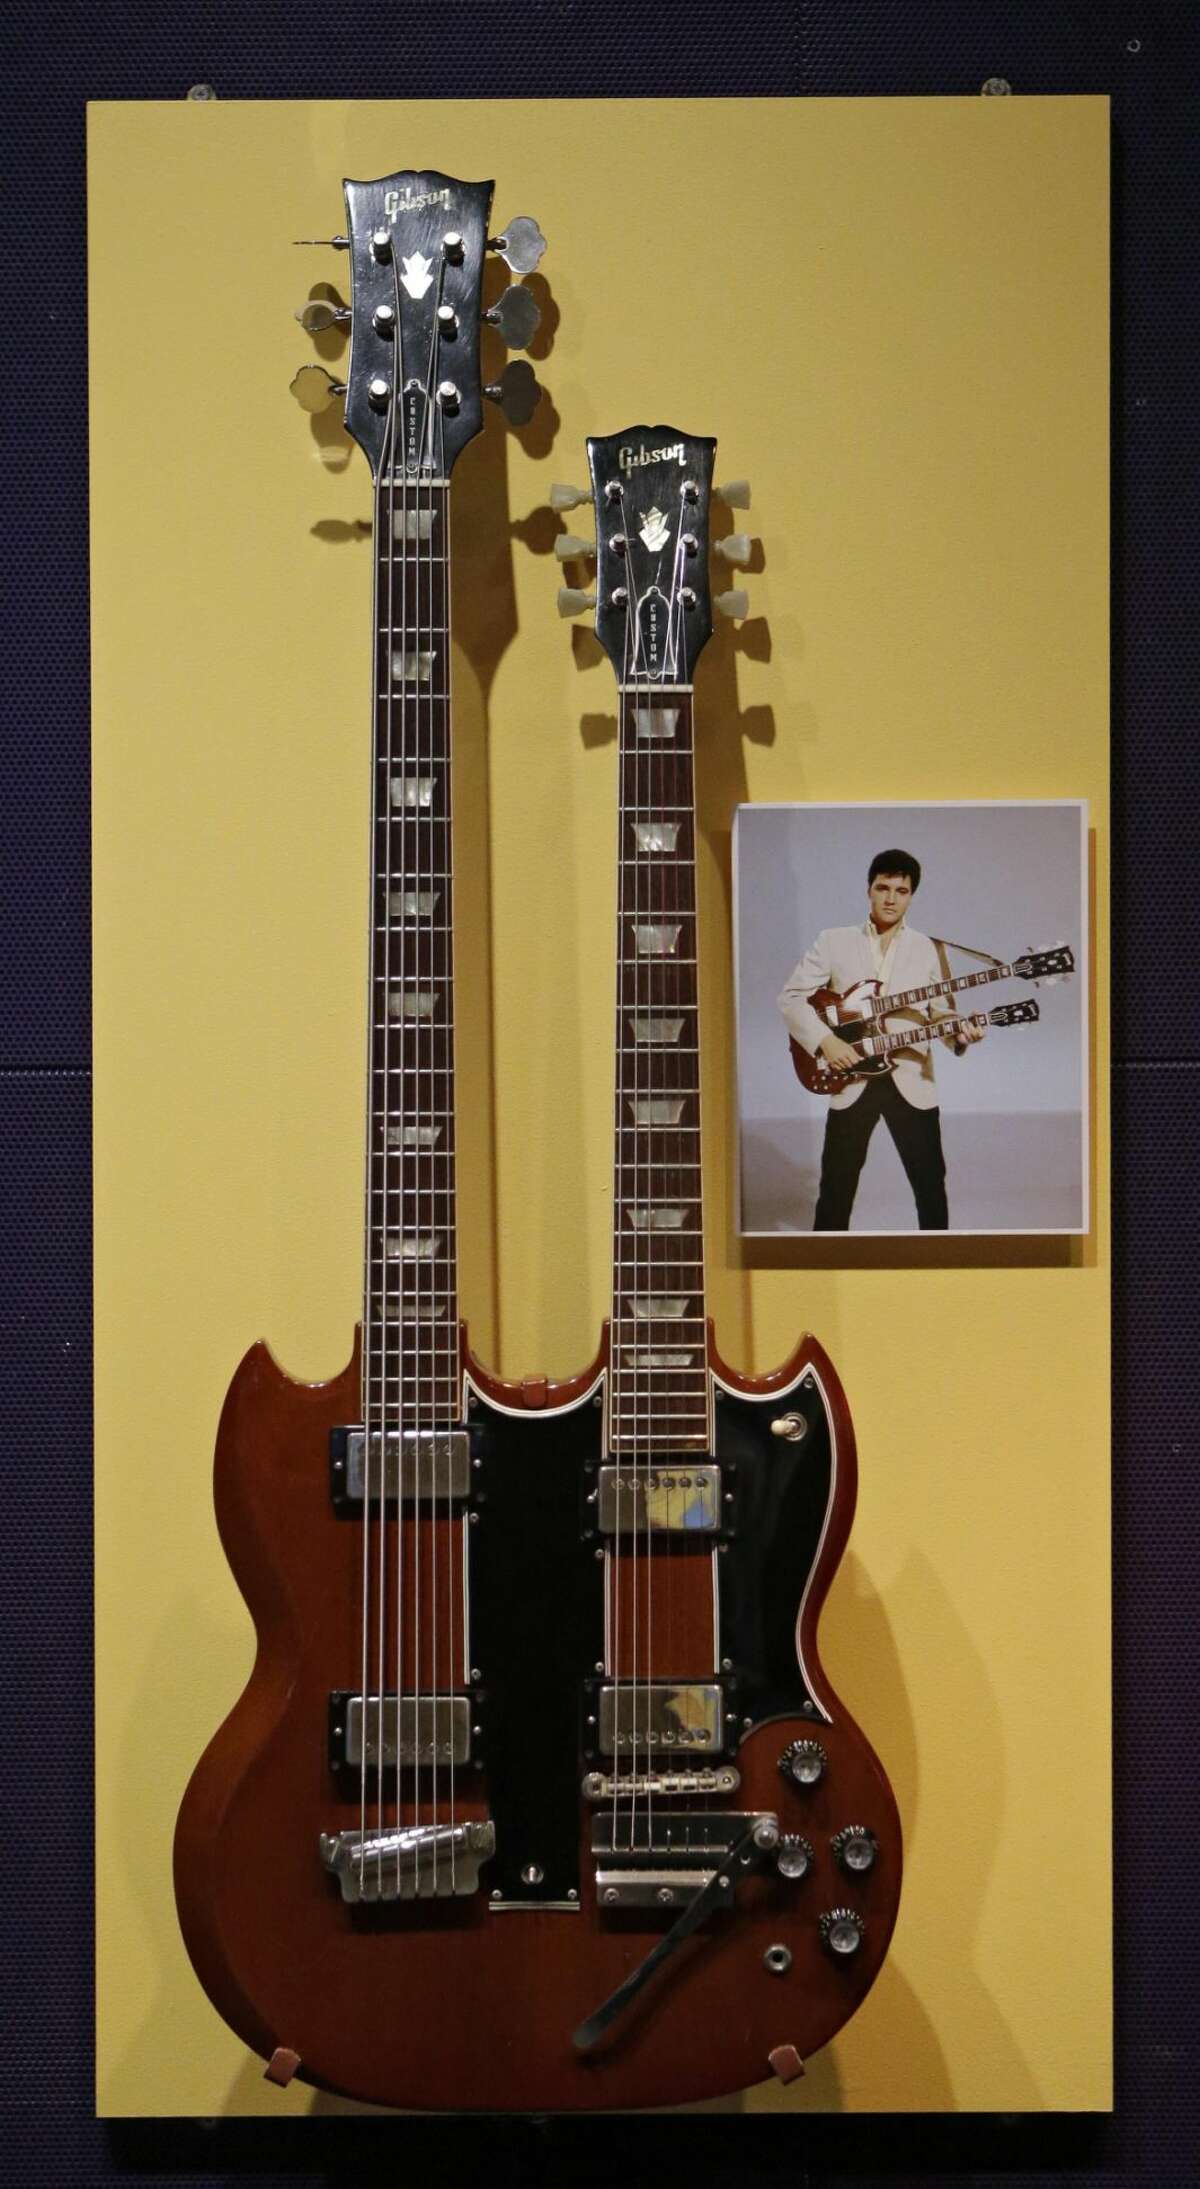 Elvis items featured at Rock and Roll Hall of Fame